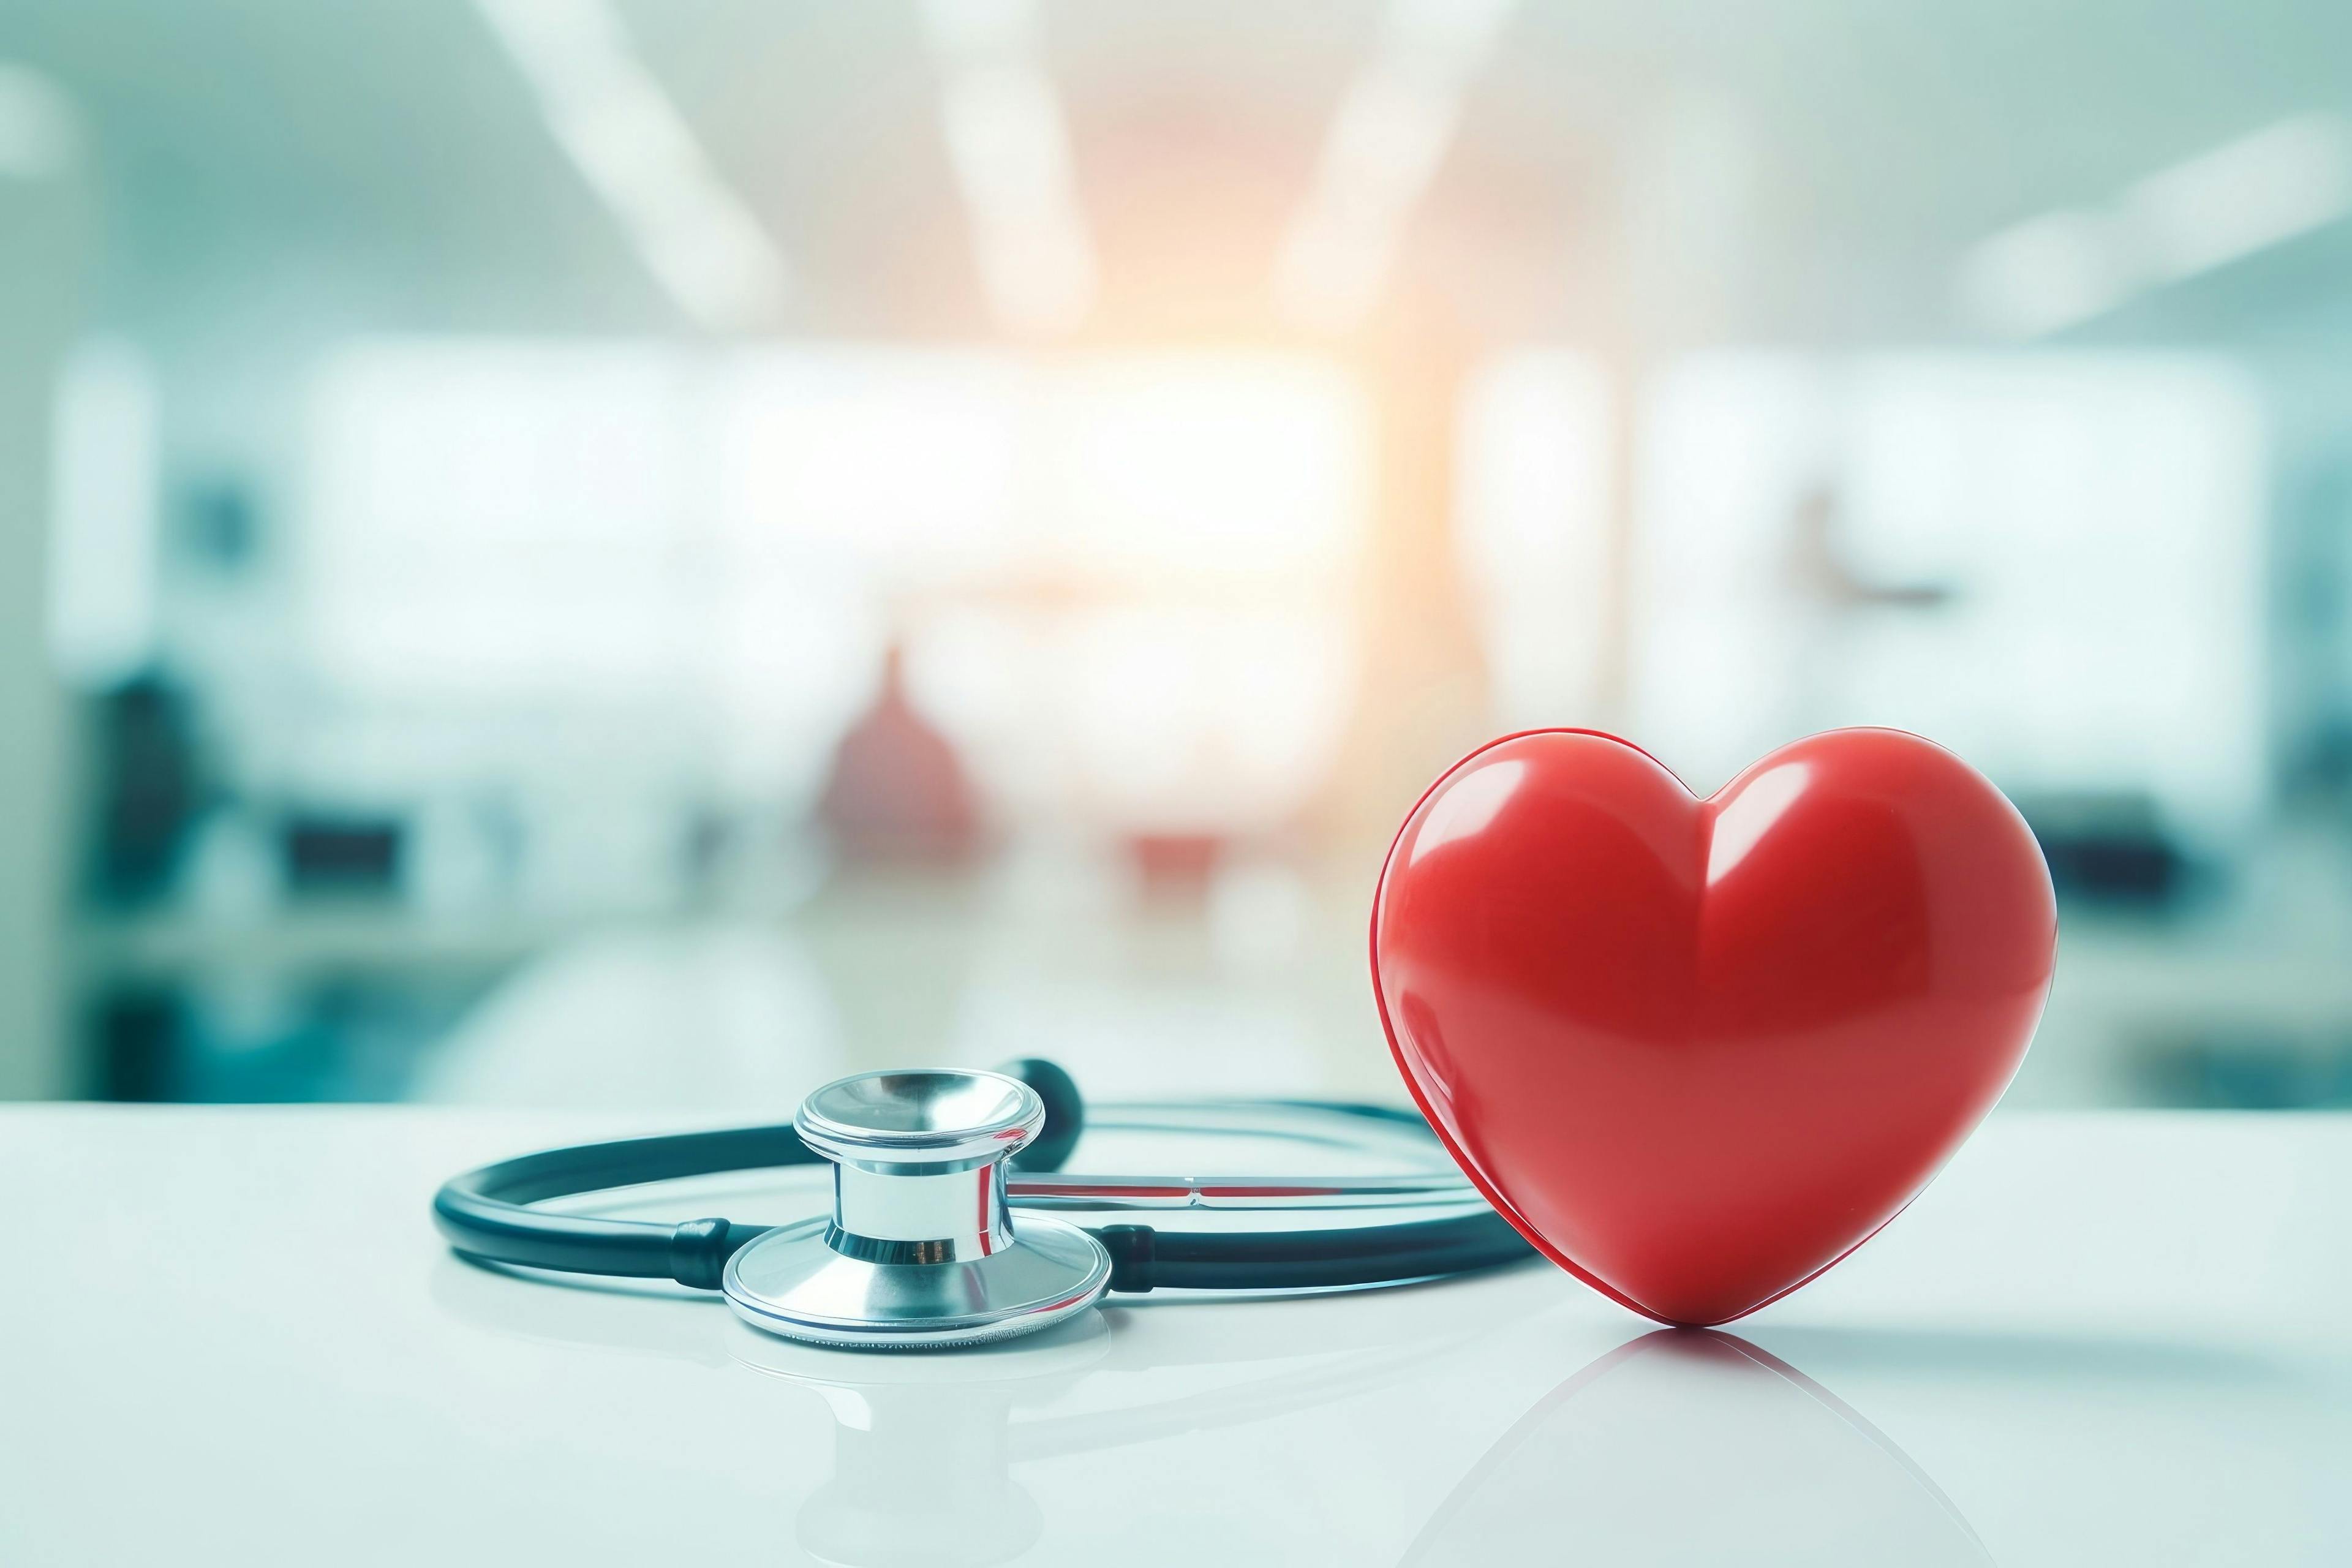 Heart and Stethoscope Managed Care Concept | image credit: Image Alchemy - stock.adobe.com